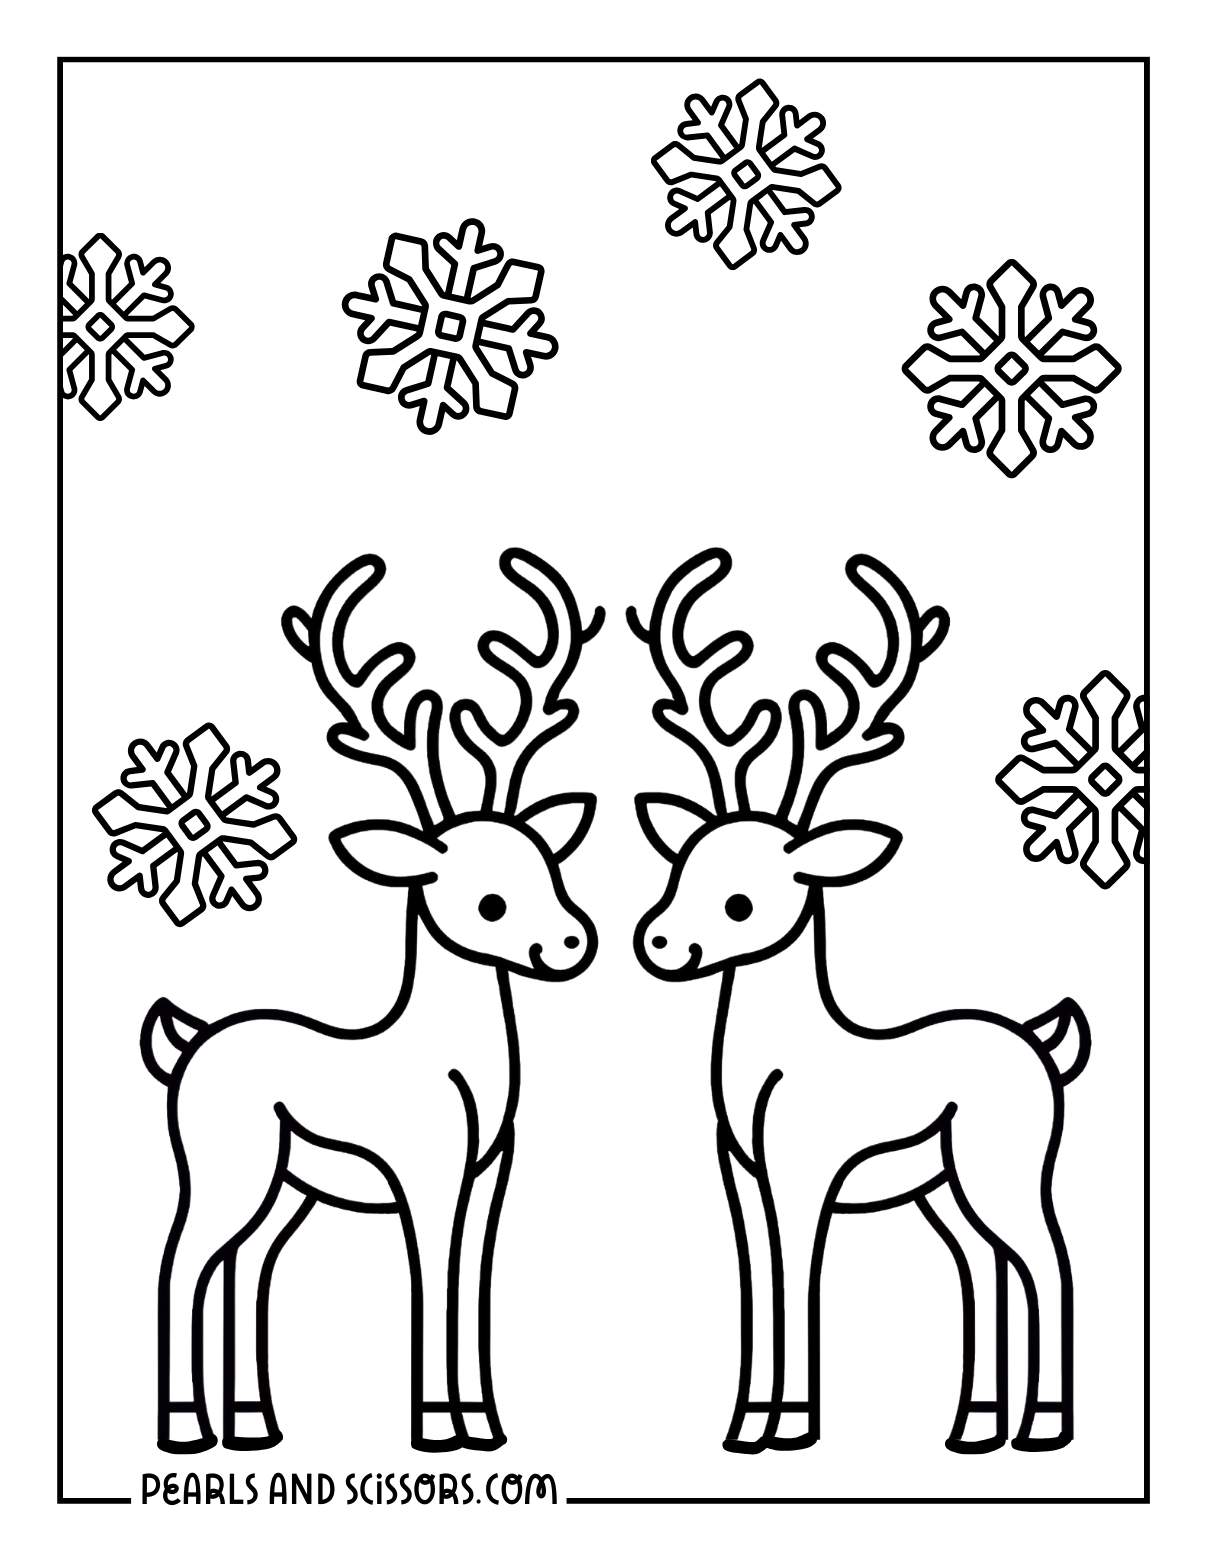 Two deers in winter coloring page with snowflakes.